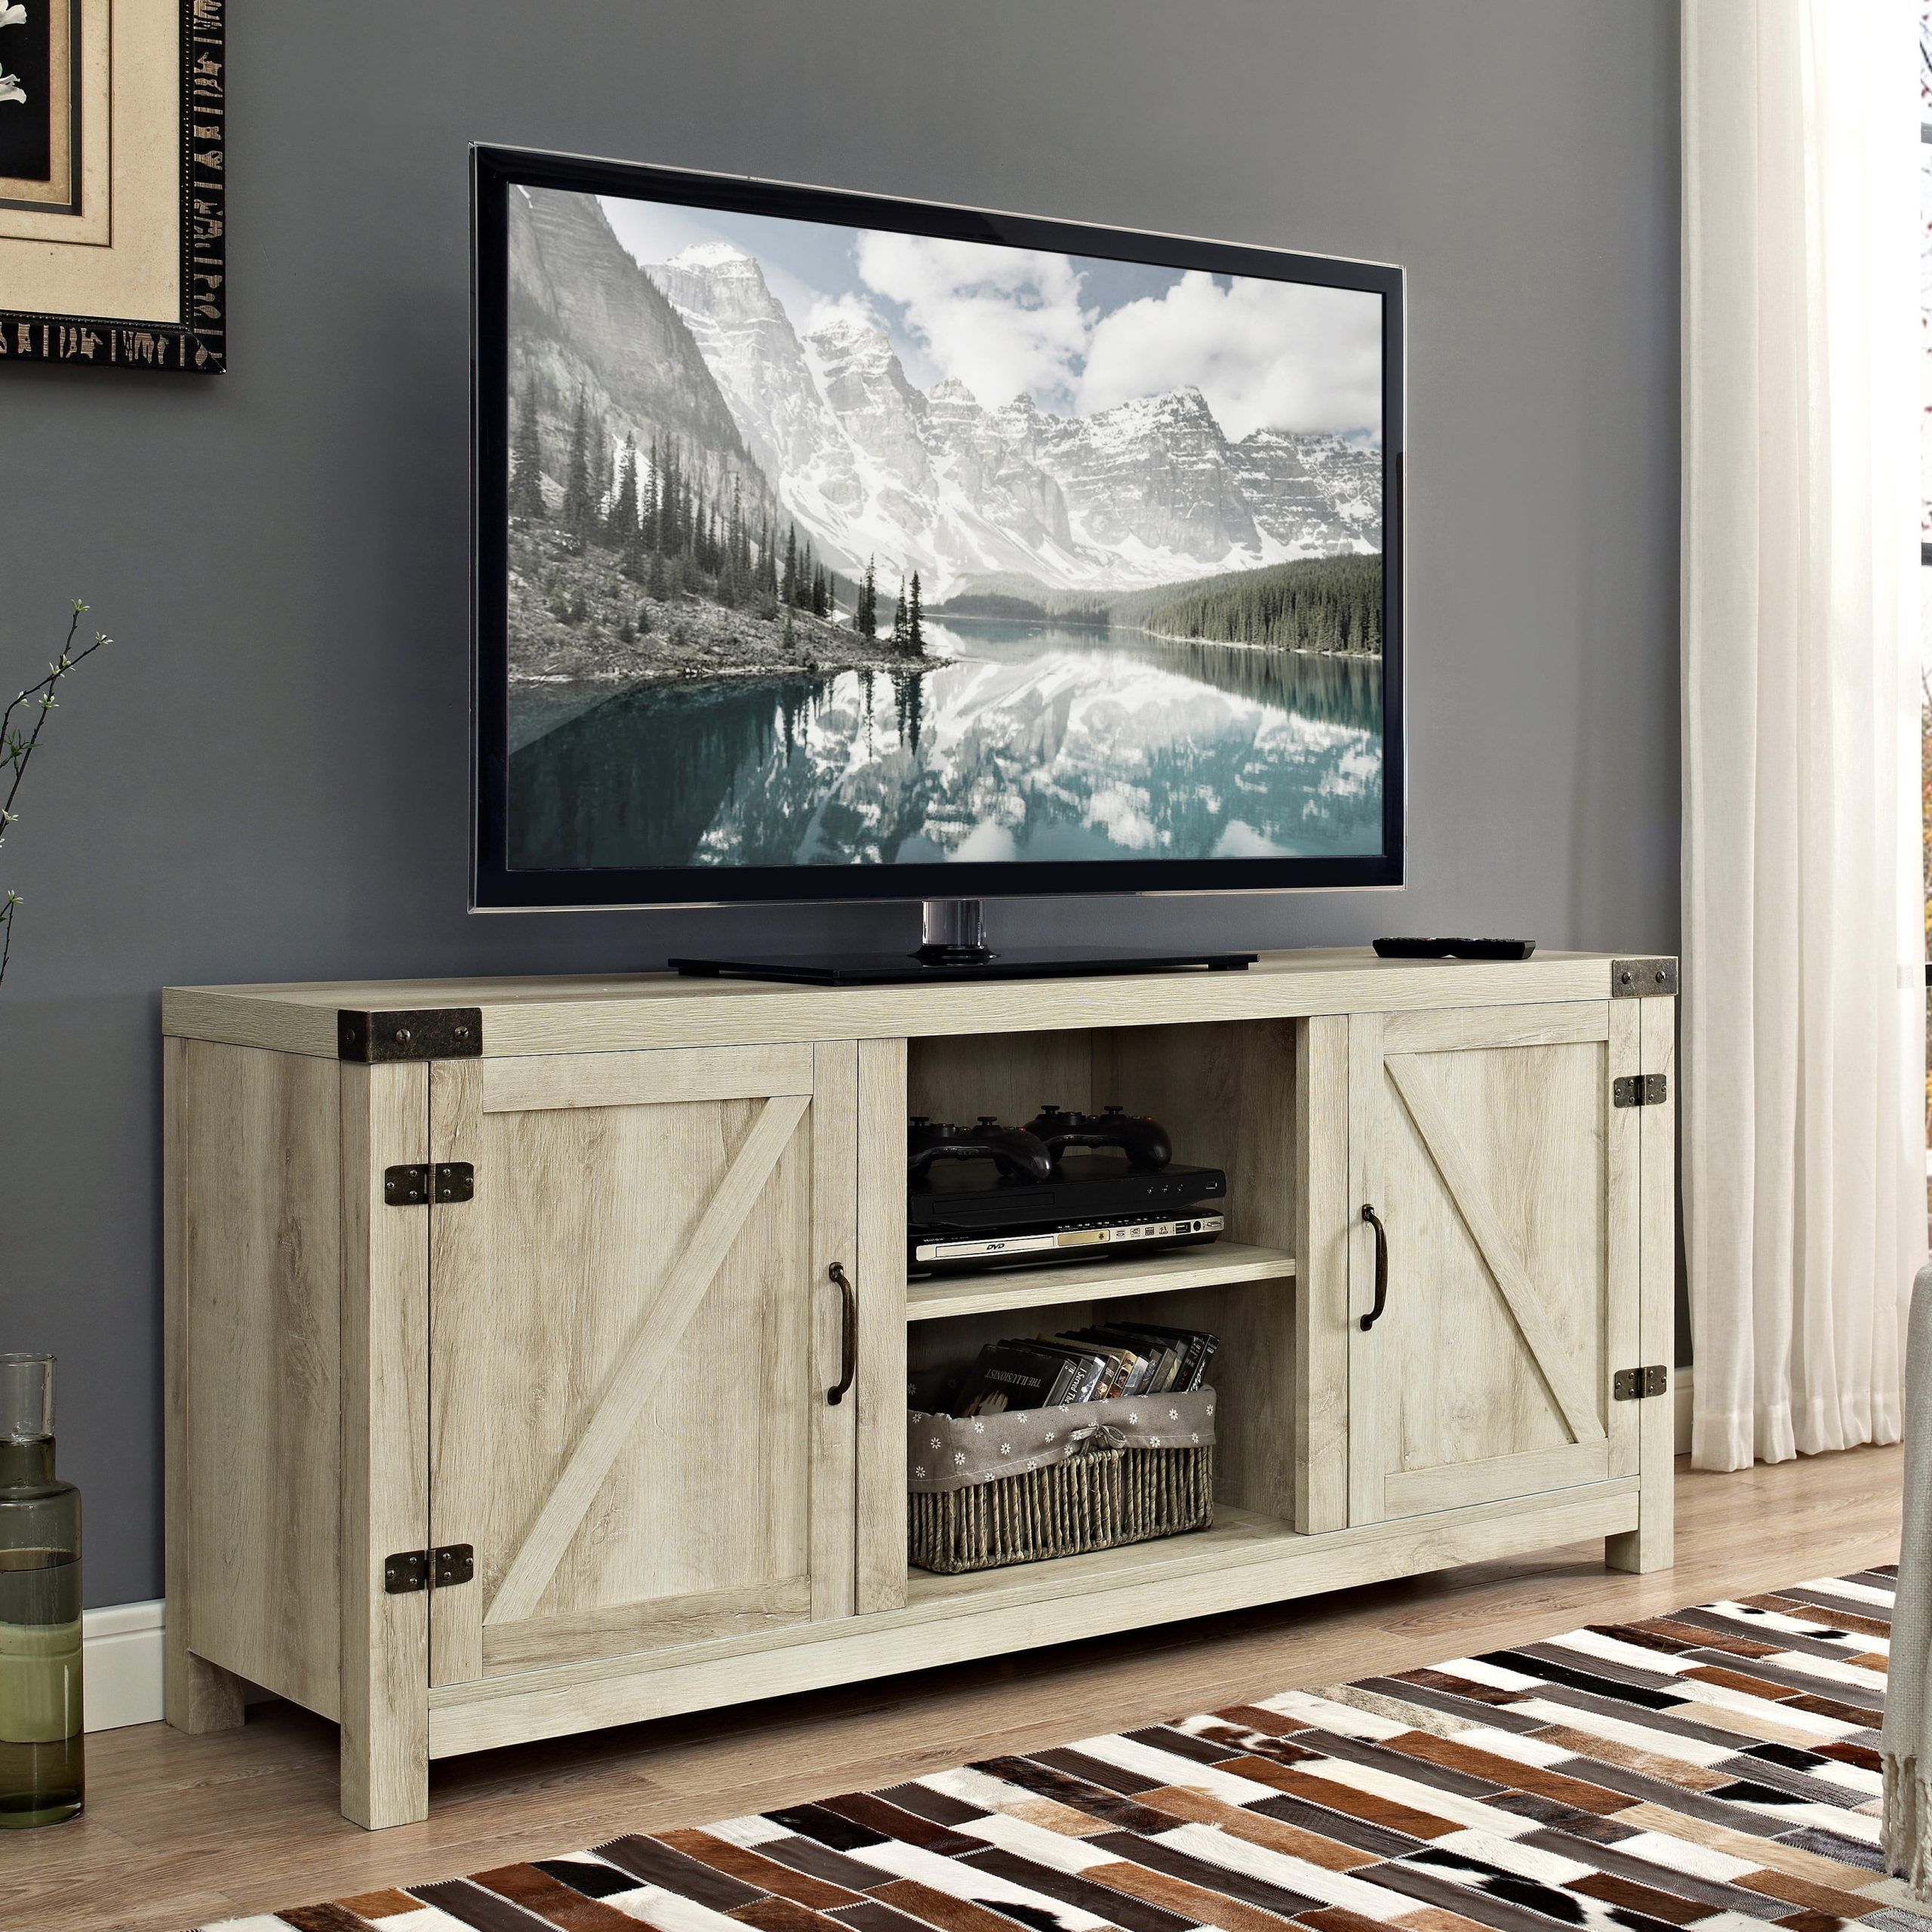 Woven Paths Modern Farmhouse Barn Door Tv Stand For Tvs Up To 65 Pertaining To Modern Farmhouse Rustic Tv Stands (View 3 of 20)